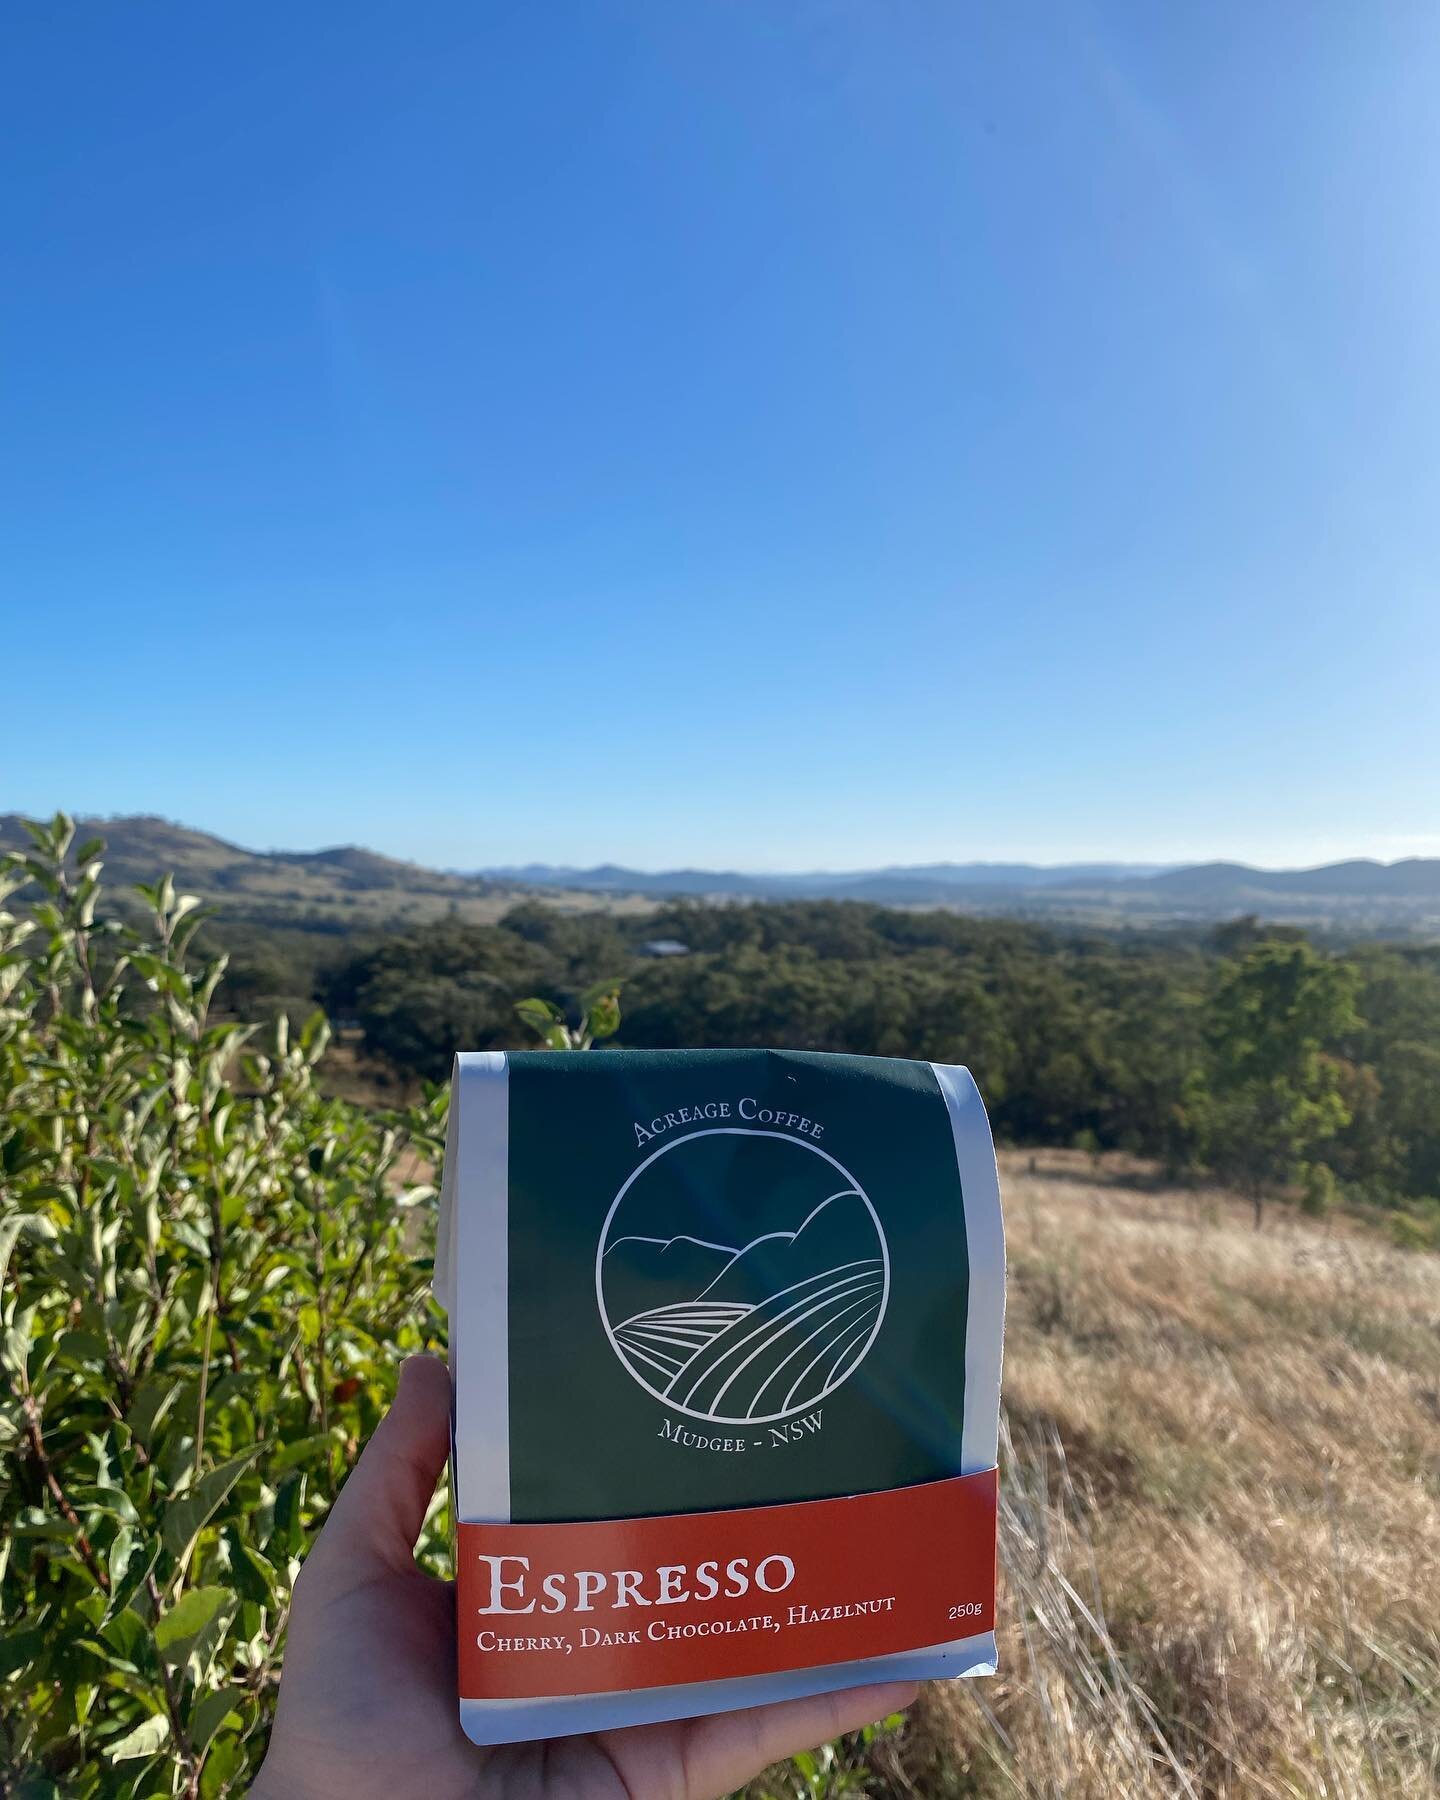 Nothing like opening a fresh bag of Espresso coffee on a beautiful Mudgee morning. If you need yours catch us at @mudgeefarmersmarket tomorrow morning! 8:30am - 12:30pm.  #coffeeroaster #specialtycoffee #visitmudgeeregion #supportlocalbusiness